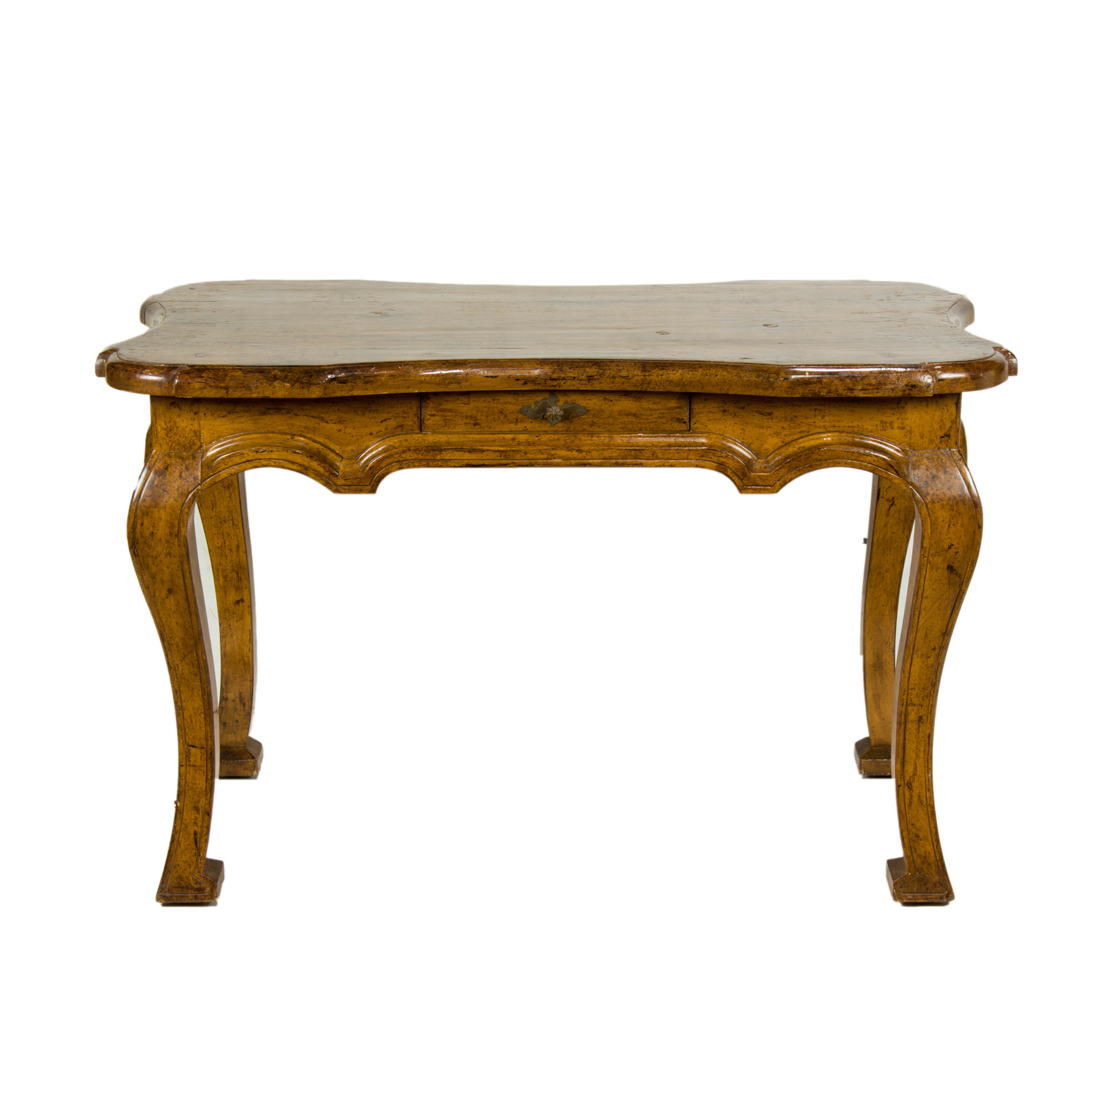 A ROCOCO STYLE FOYER TABLE A Rococo 2d26af